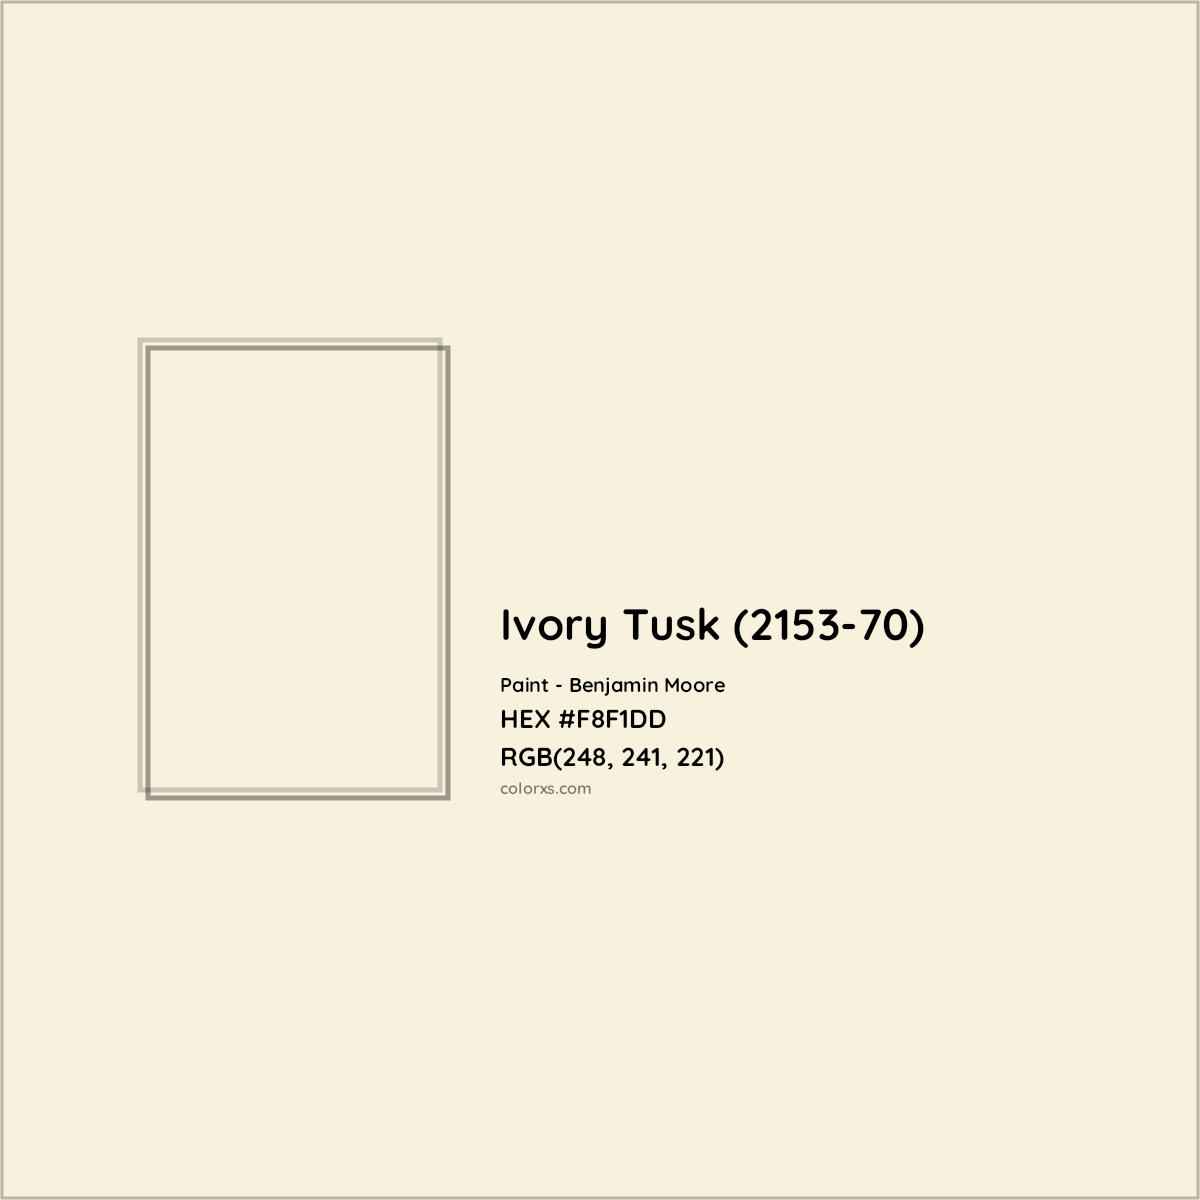 HEX #F8F1DD Ivory Tusk (2153-70) Paint Benjamin Moore - Color Code